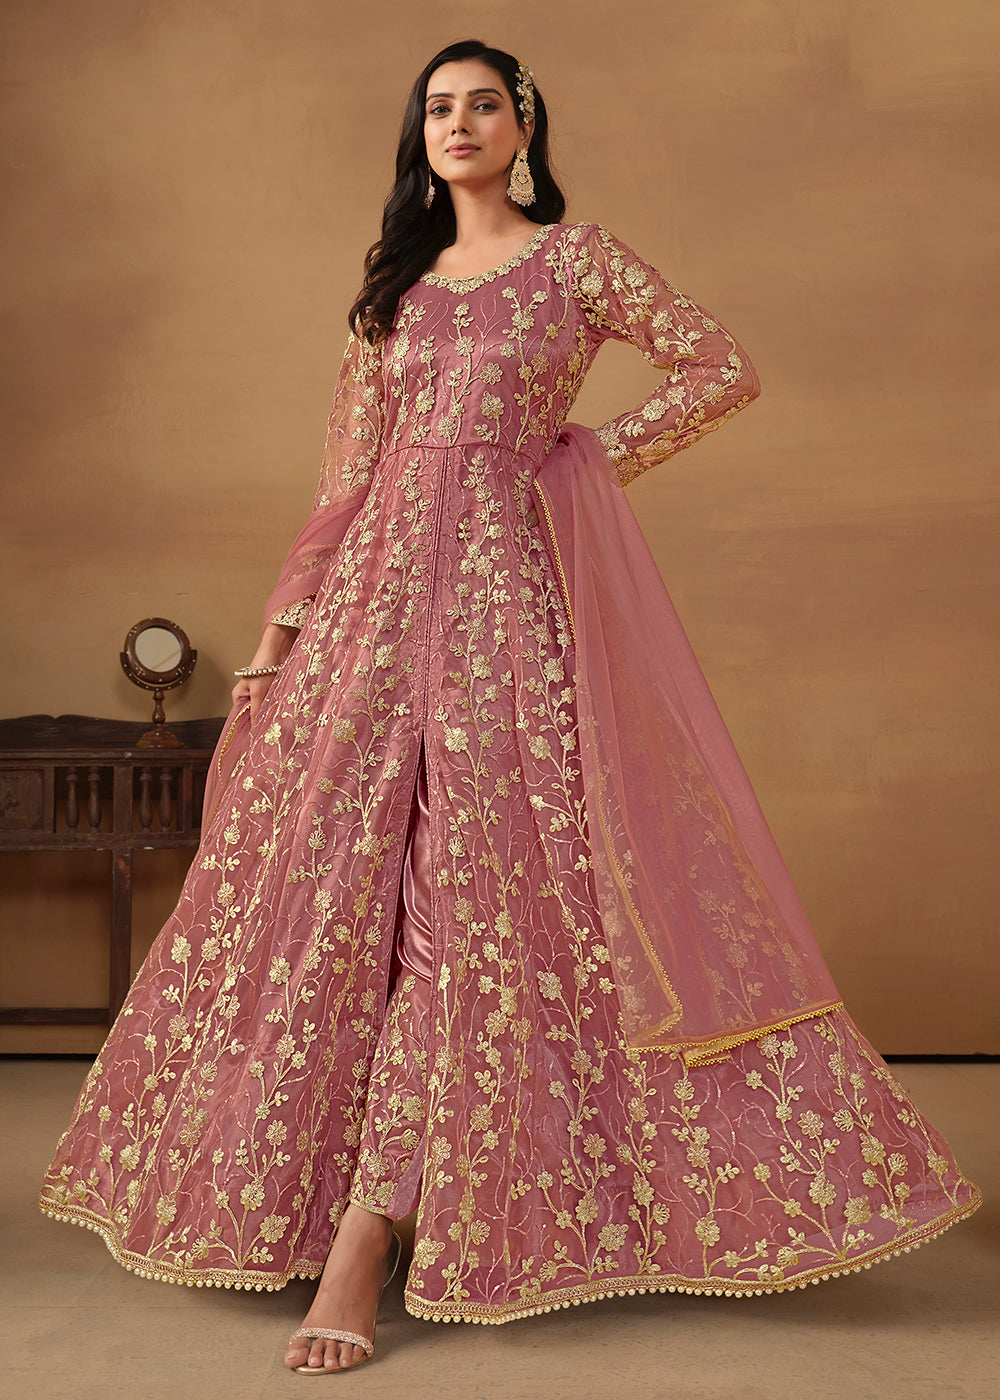 Buy Now Pant Style Coral Pink Embroidered Net Wedding Anarkali Suit Online in USA, UK, Australia, New Zealand, Canada & Worldwide at Empress Clothing. 